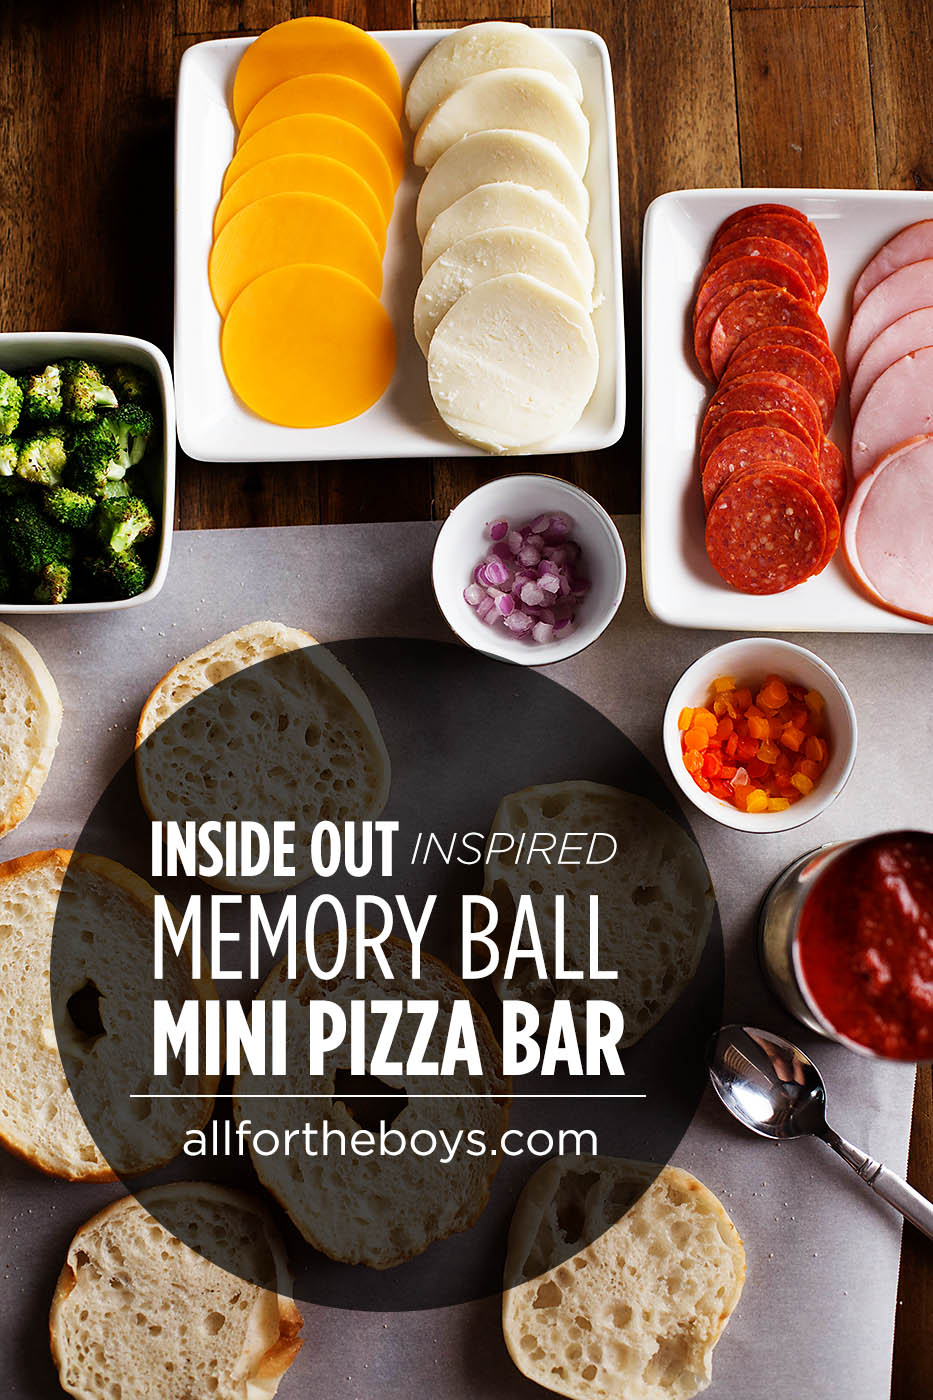 Inside Out Movie night with a memory ball pizza bar, I LAVA You printables for dessert and a DIY marquee sign!